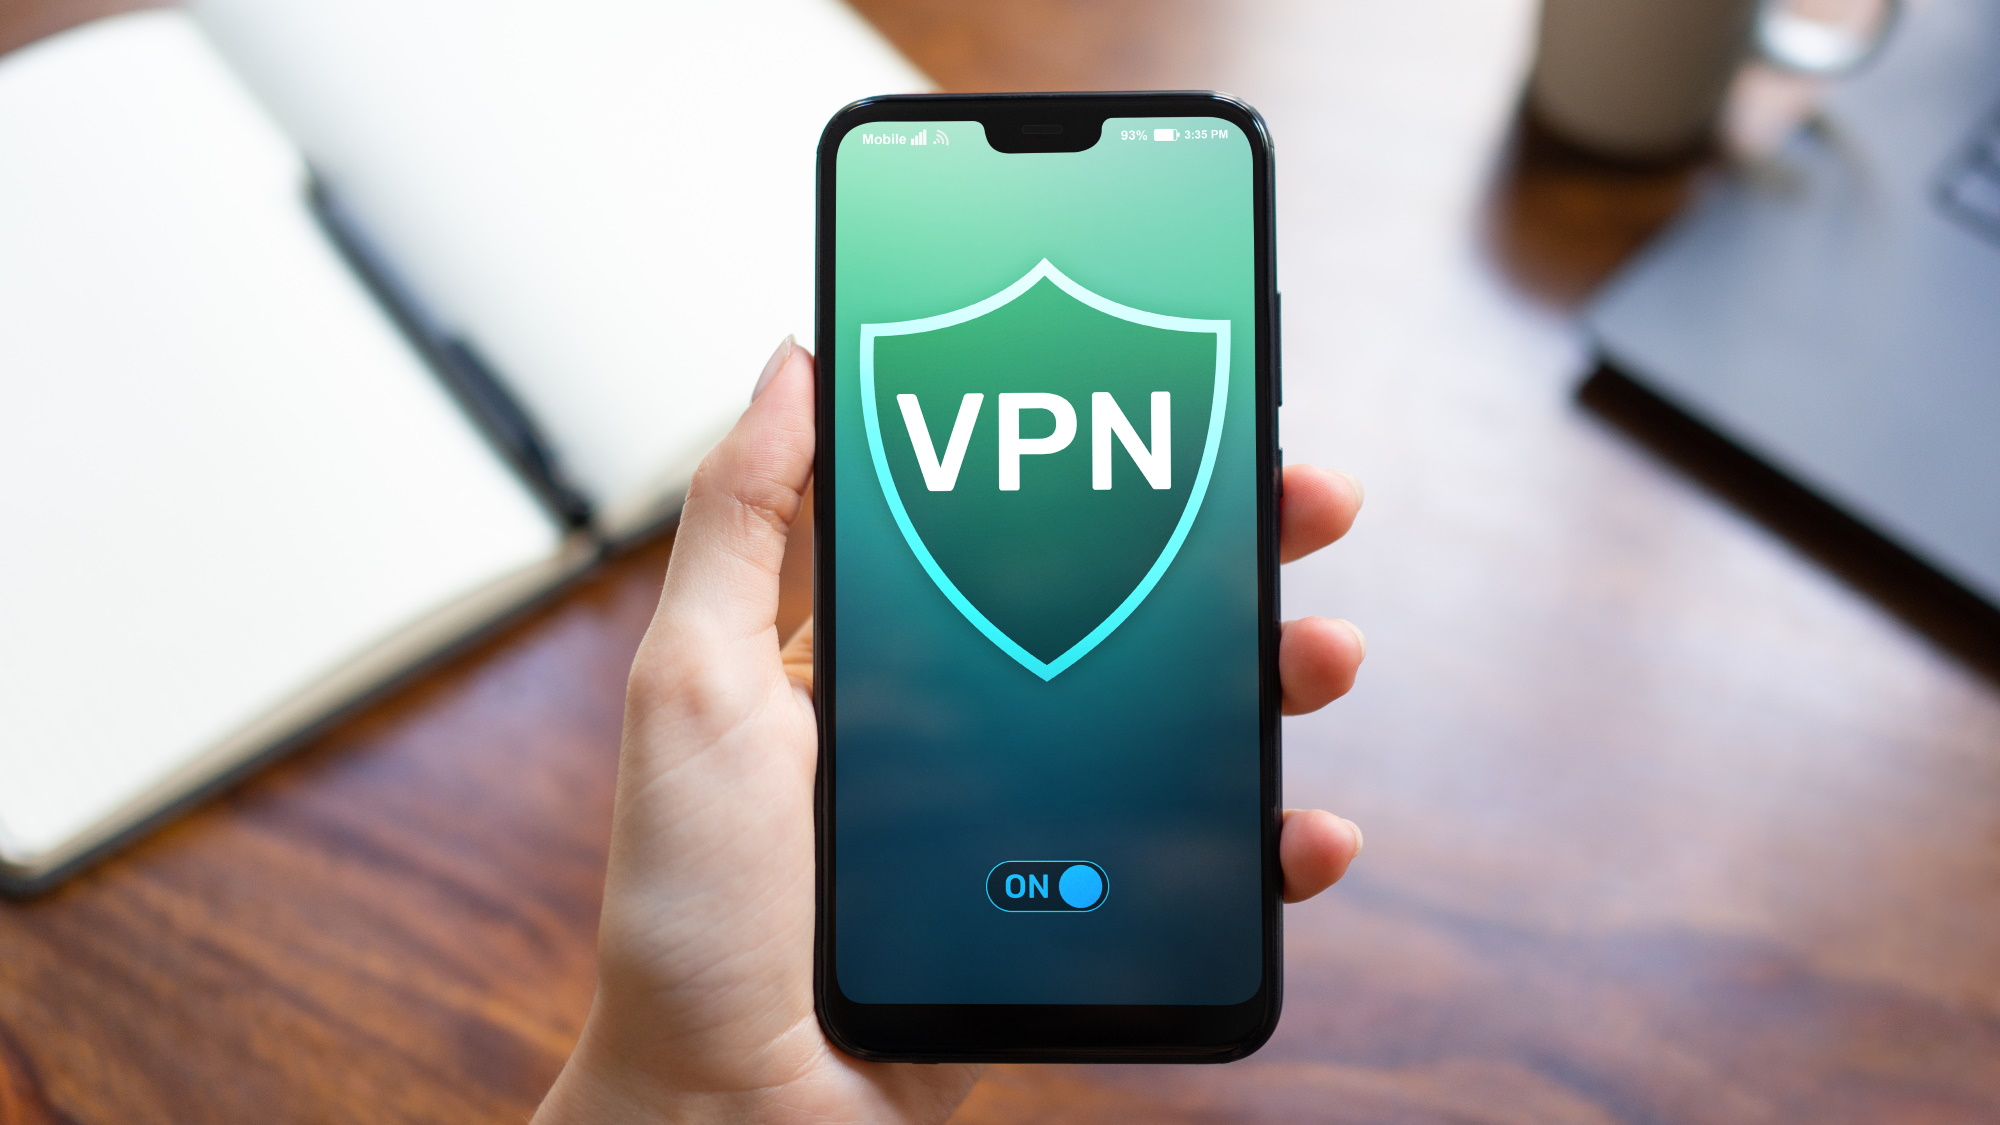 Which VPN has completely free trial?